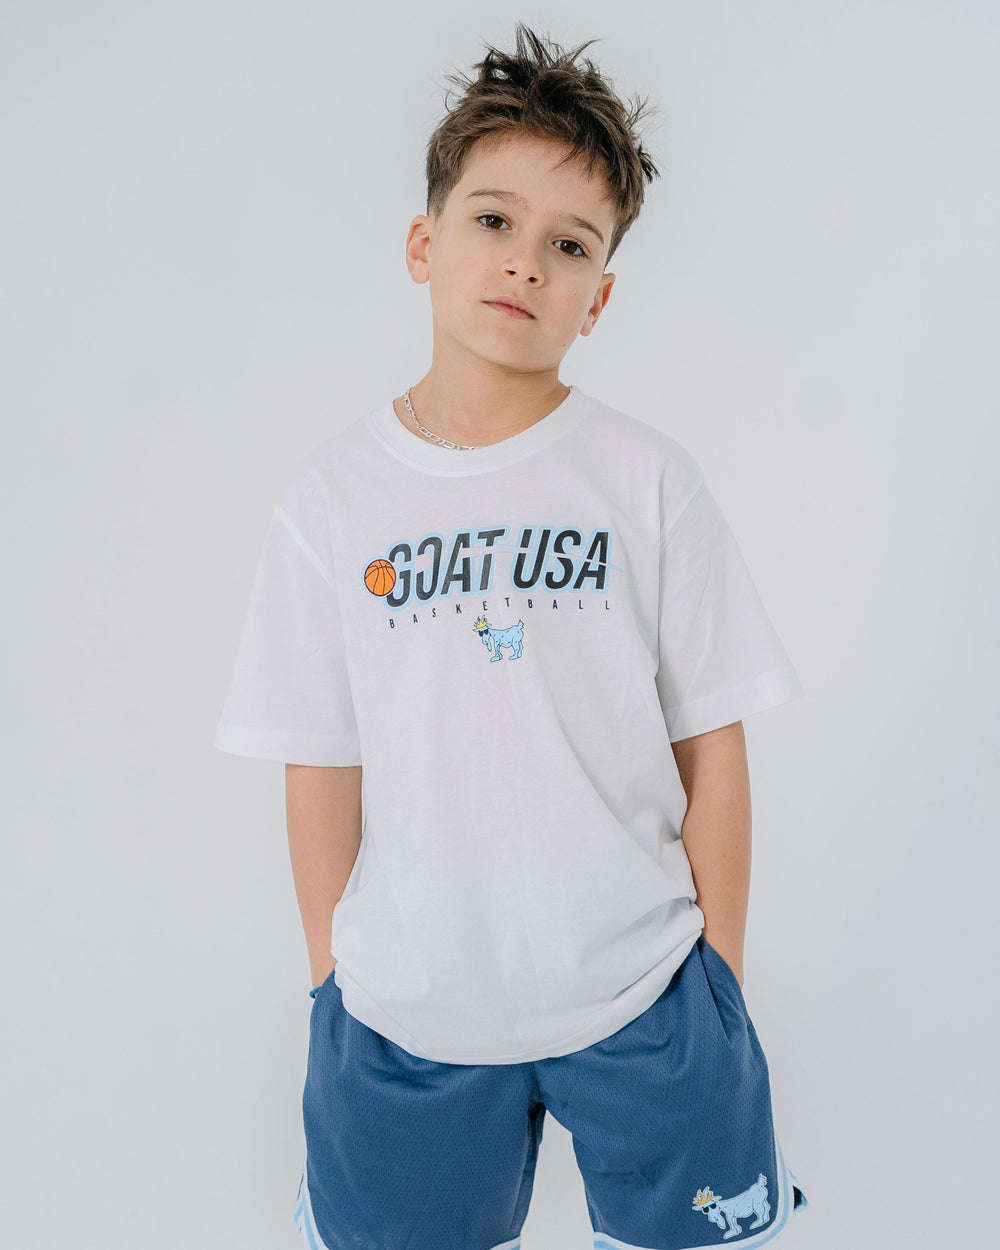 Kid wearing white shirt with basketball that goes through the wording "GOAT USA"